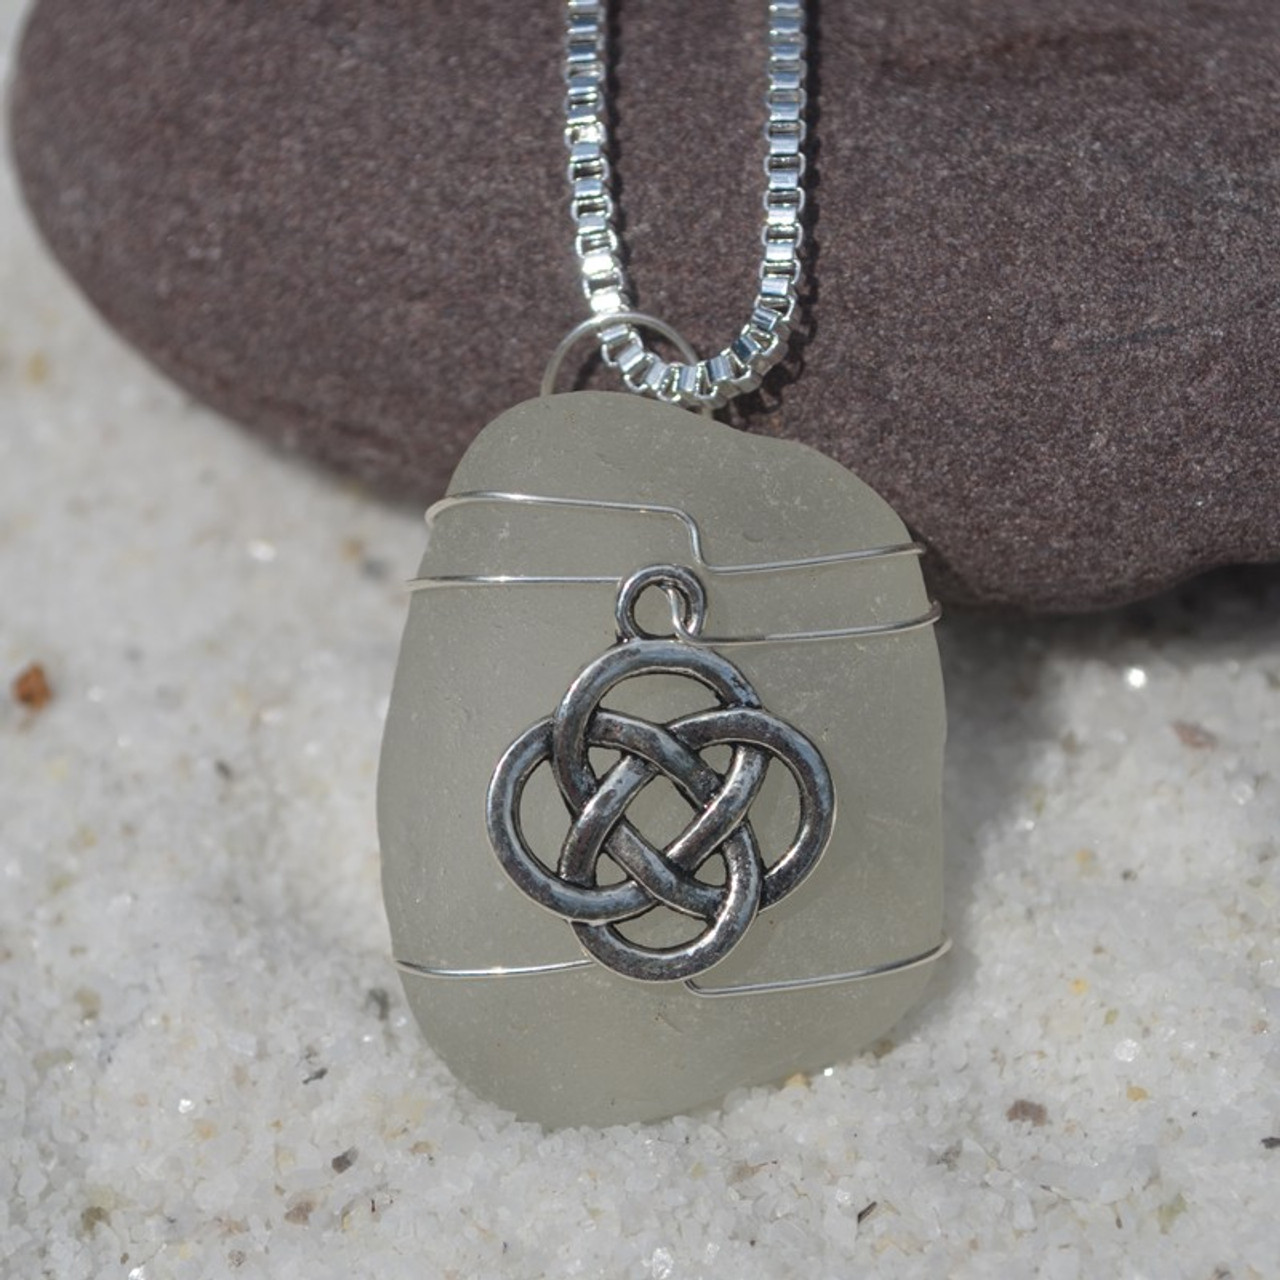 Genuine Sea Glass Necklace with a Silver Celtic Knot Charm - Choose the Color - Frosted, Green, Brown, or Aqua - Made to Order